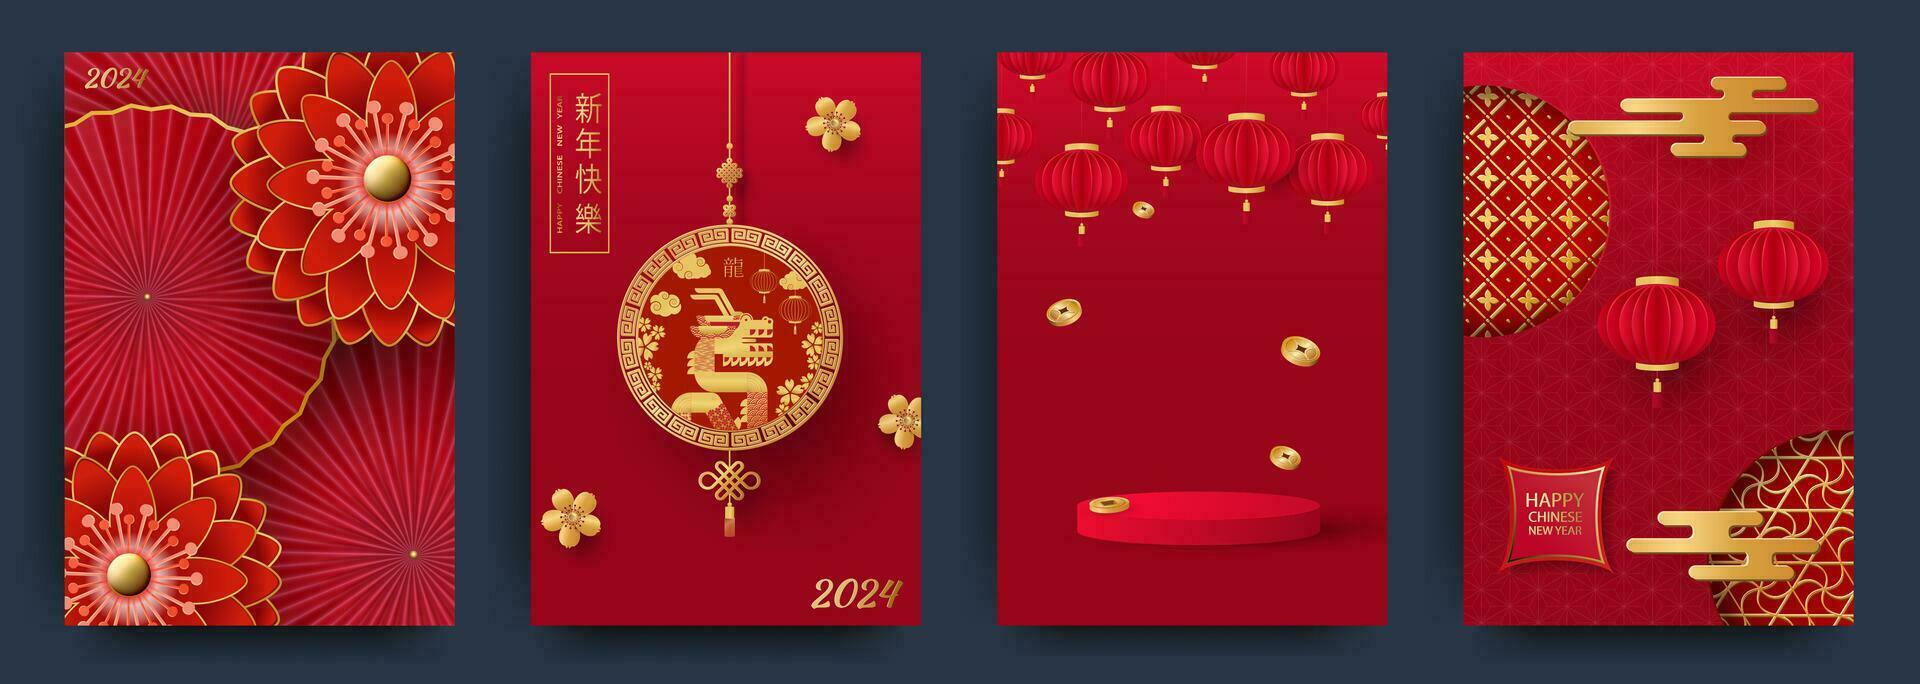 Set of greeting cards for Chinese New Year celebration. Red fans, lanterns, a medallion with a dragon and a gold pattern. Translated from Chinese - Happy New Year. Vector illustration